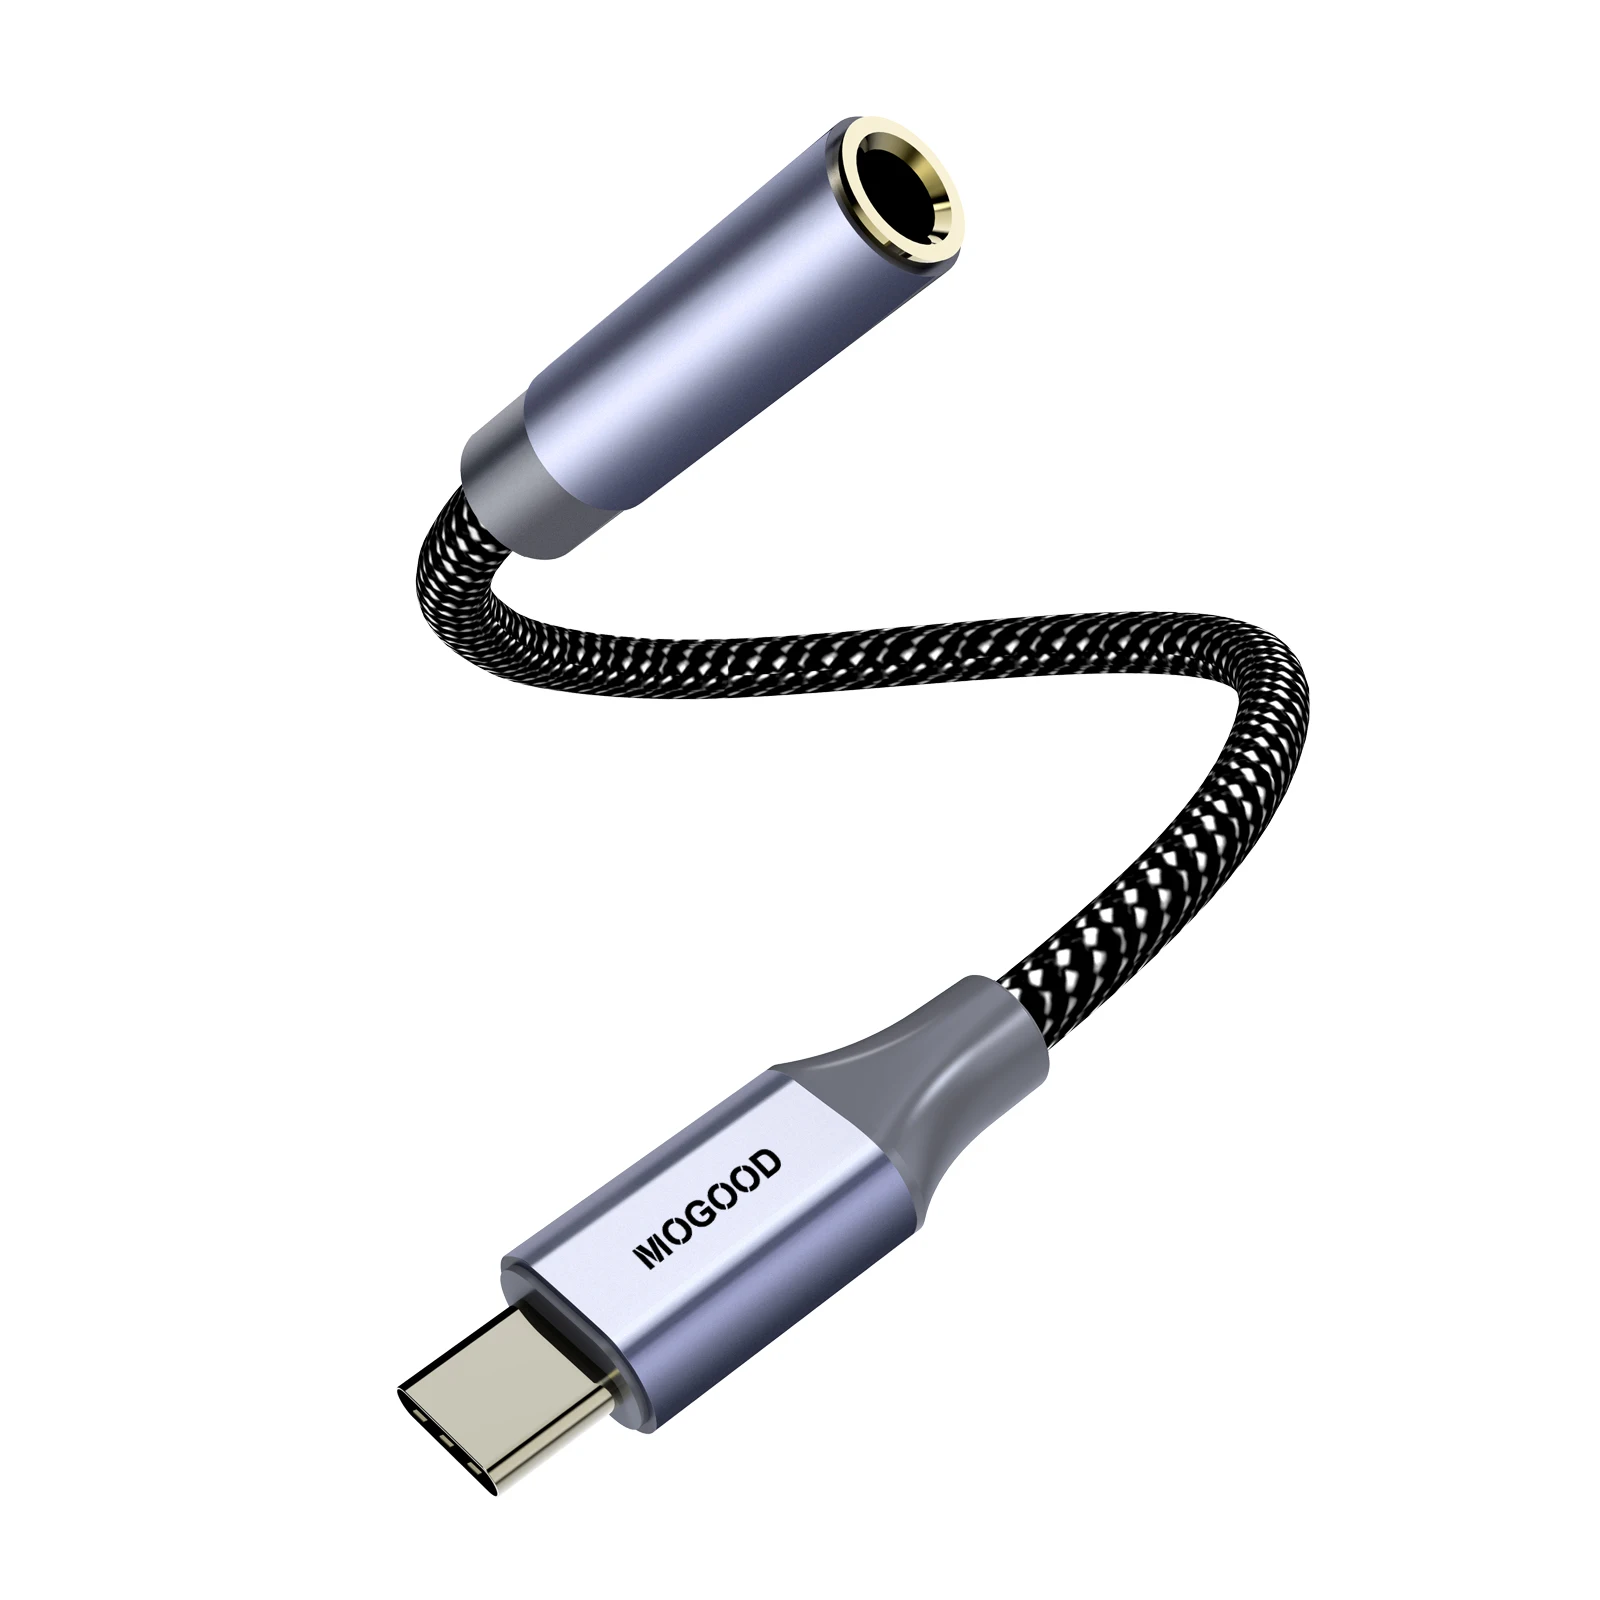 Stad bloem Kers slijm Type-c To 3.5 Female Moswag Audio Adapter Usb C To Aux Dongle Cable Cord Usb  Type C To 3.5mm Headphone Jack Adapter - Buy Type-c Audio Adapter,Usb C  Cable Cord,Headphone Jack Adapter